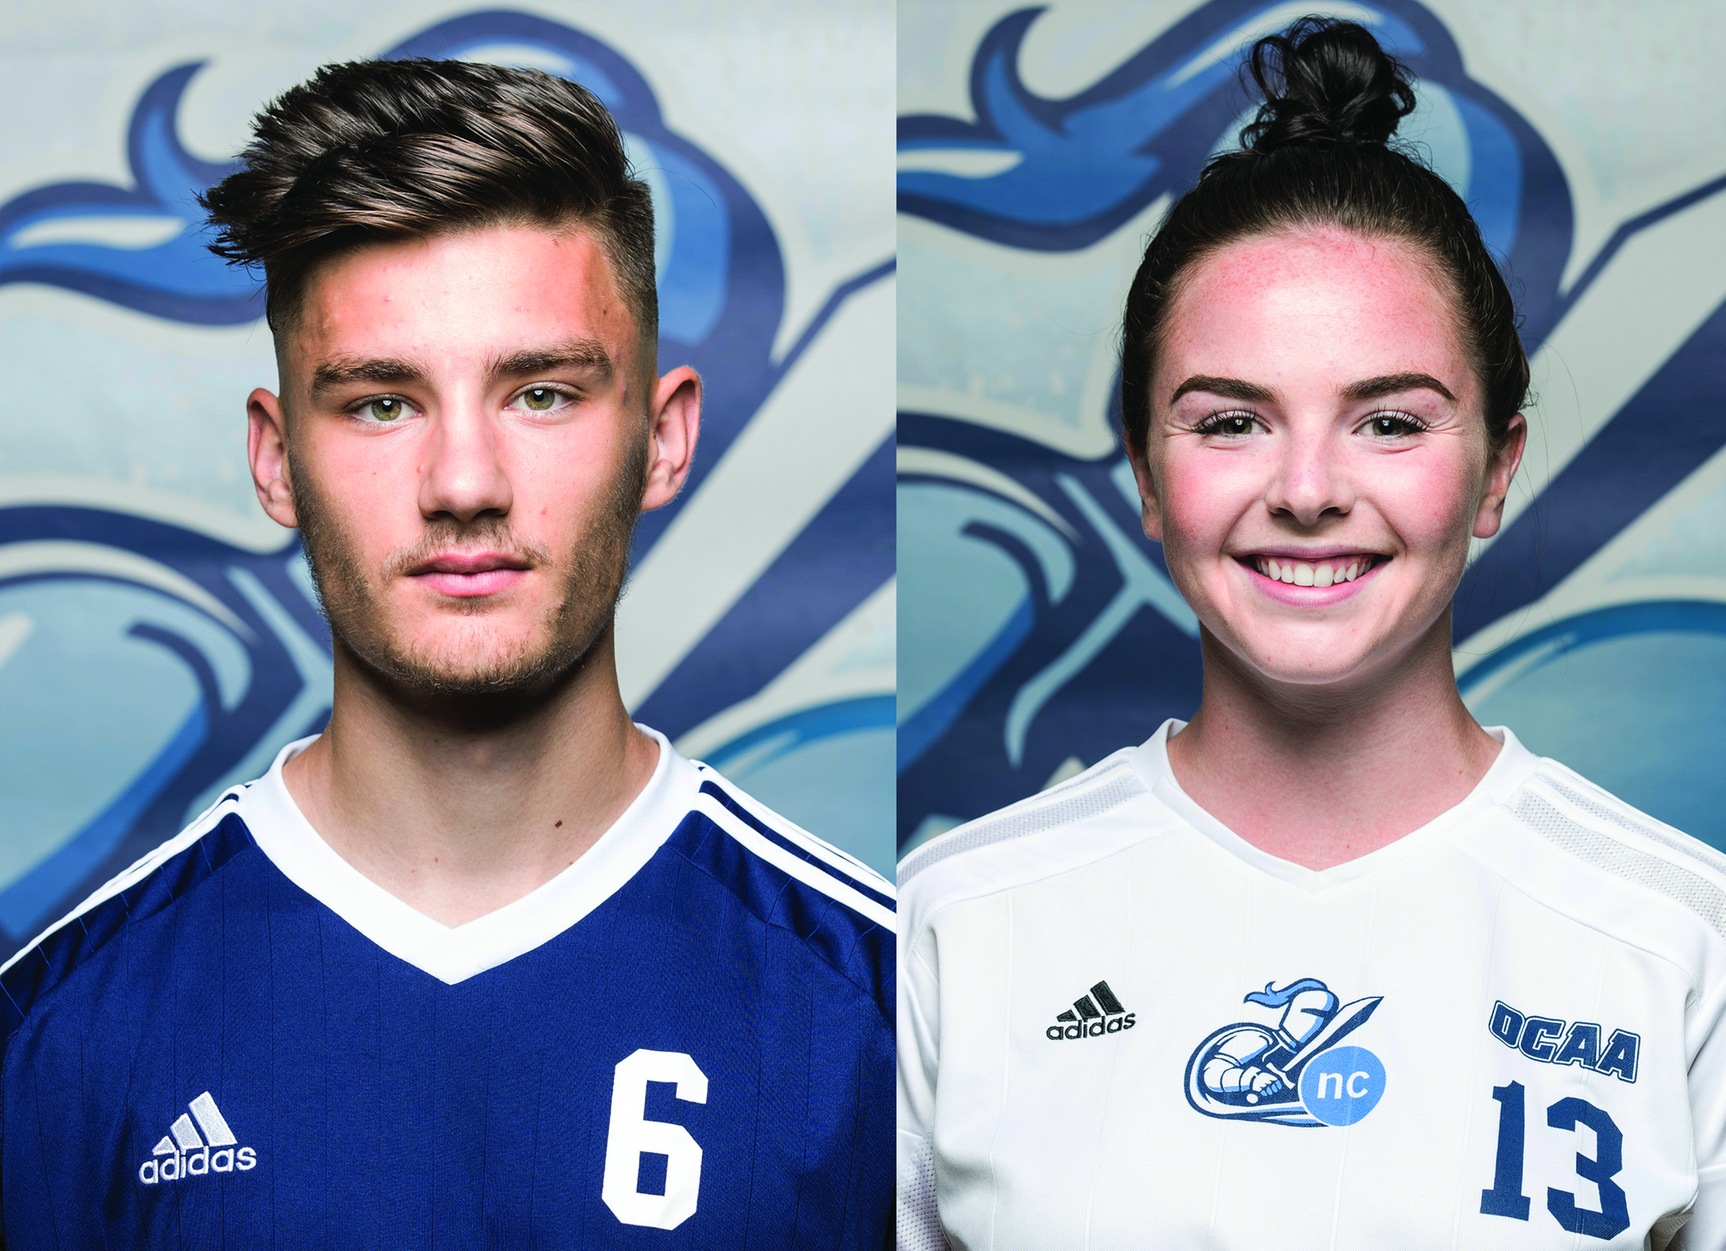 NEWS: Diacur and Halliday named Athletes of the Week